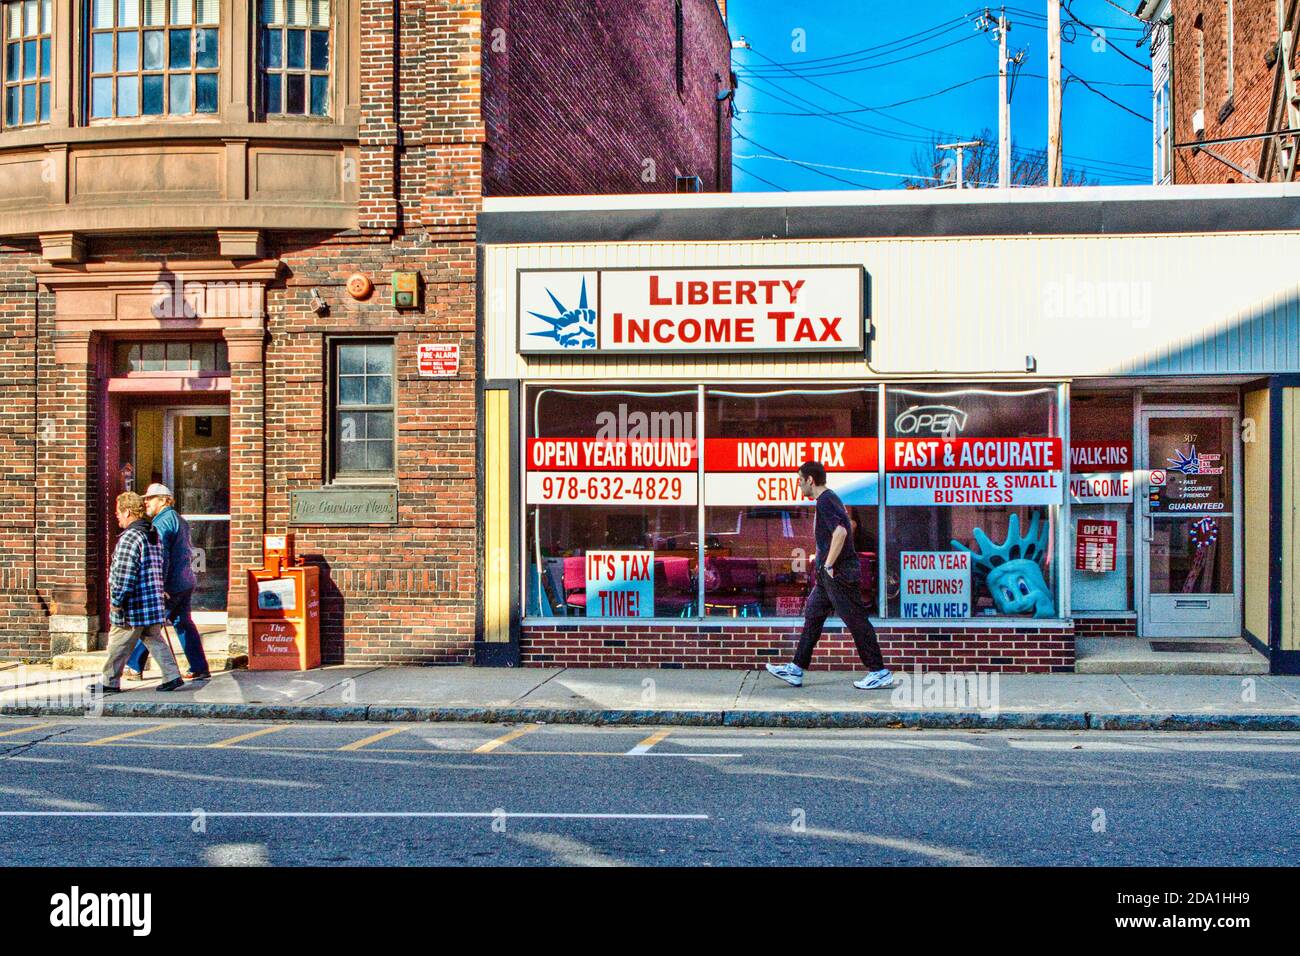 People walking by the Liberty Income Tax business Stock Photo